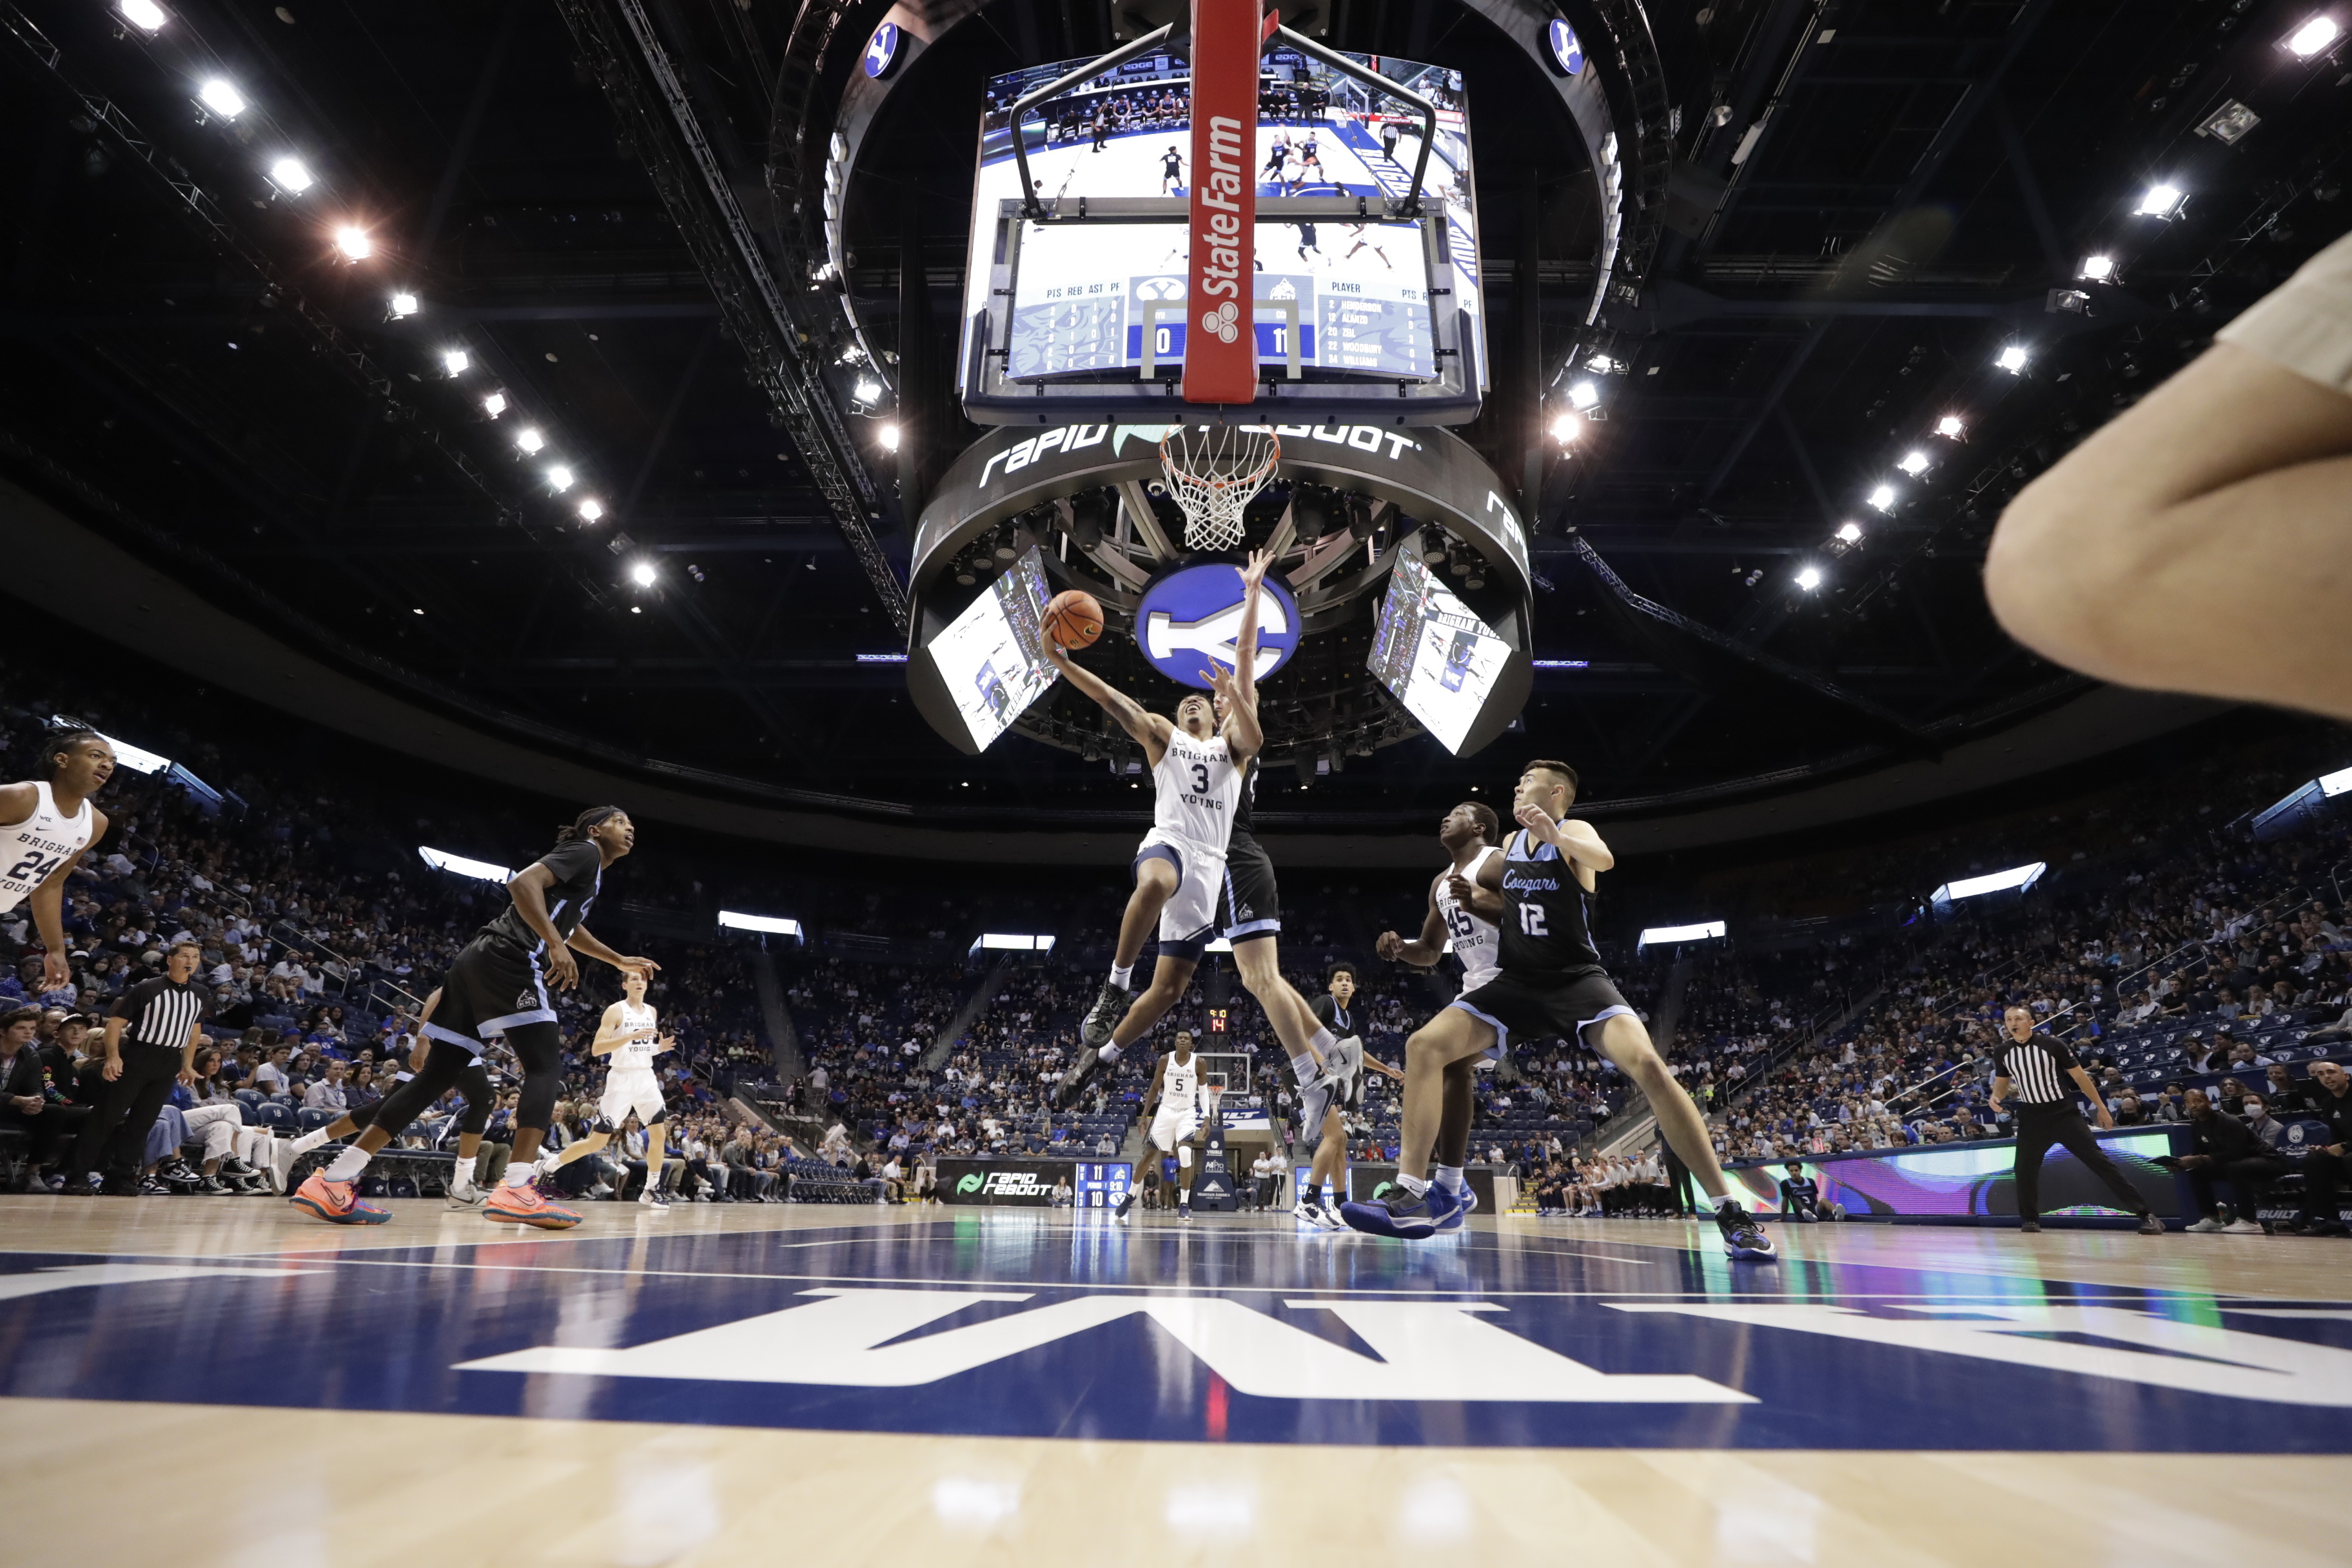 BYU men's basketball player Te'Jon Lucas drives in for a layup in the Cougars 63-45 victory over Colorado Christian University.